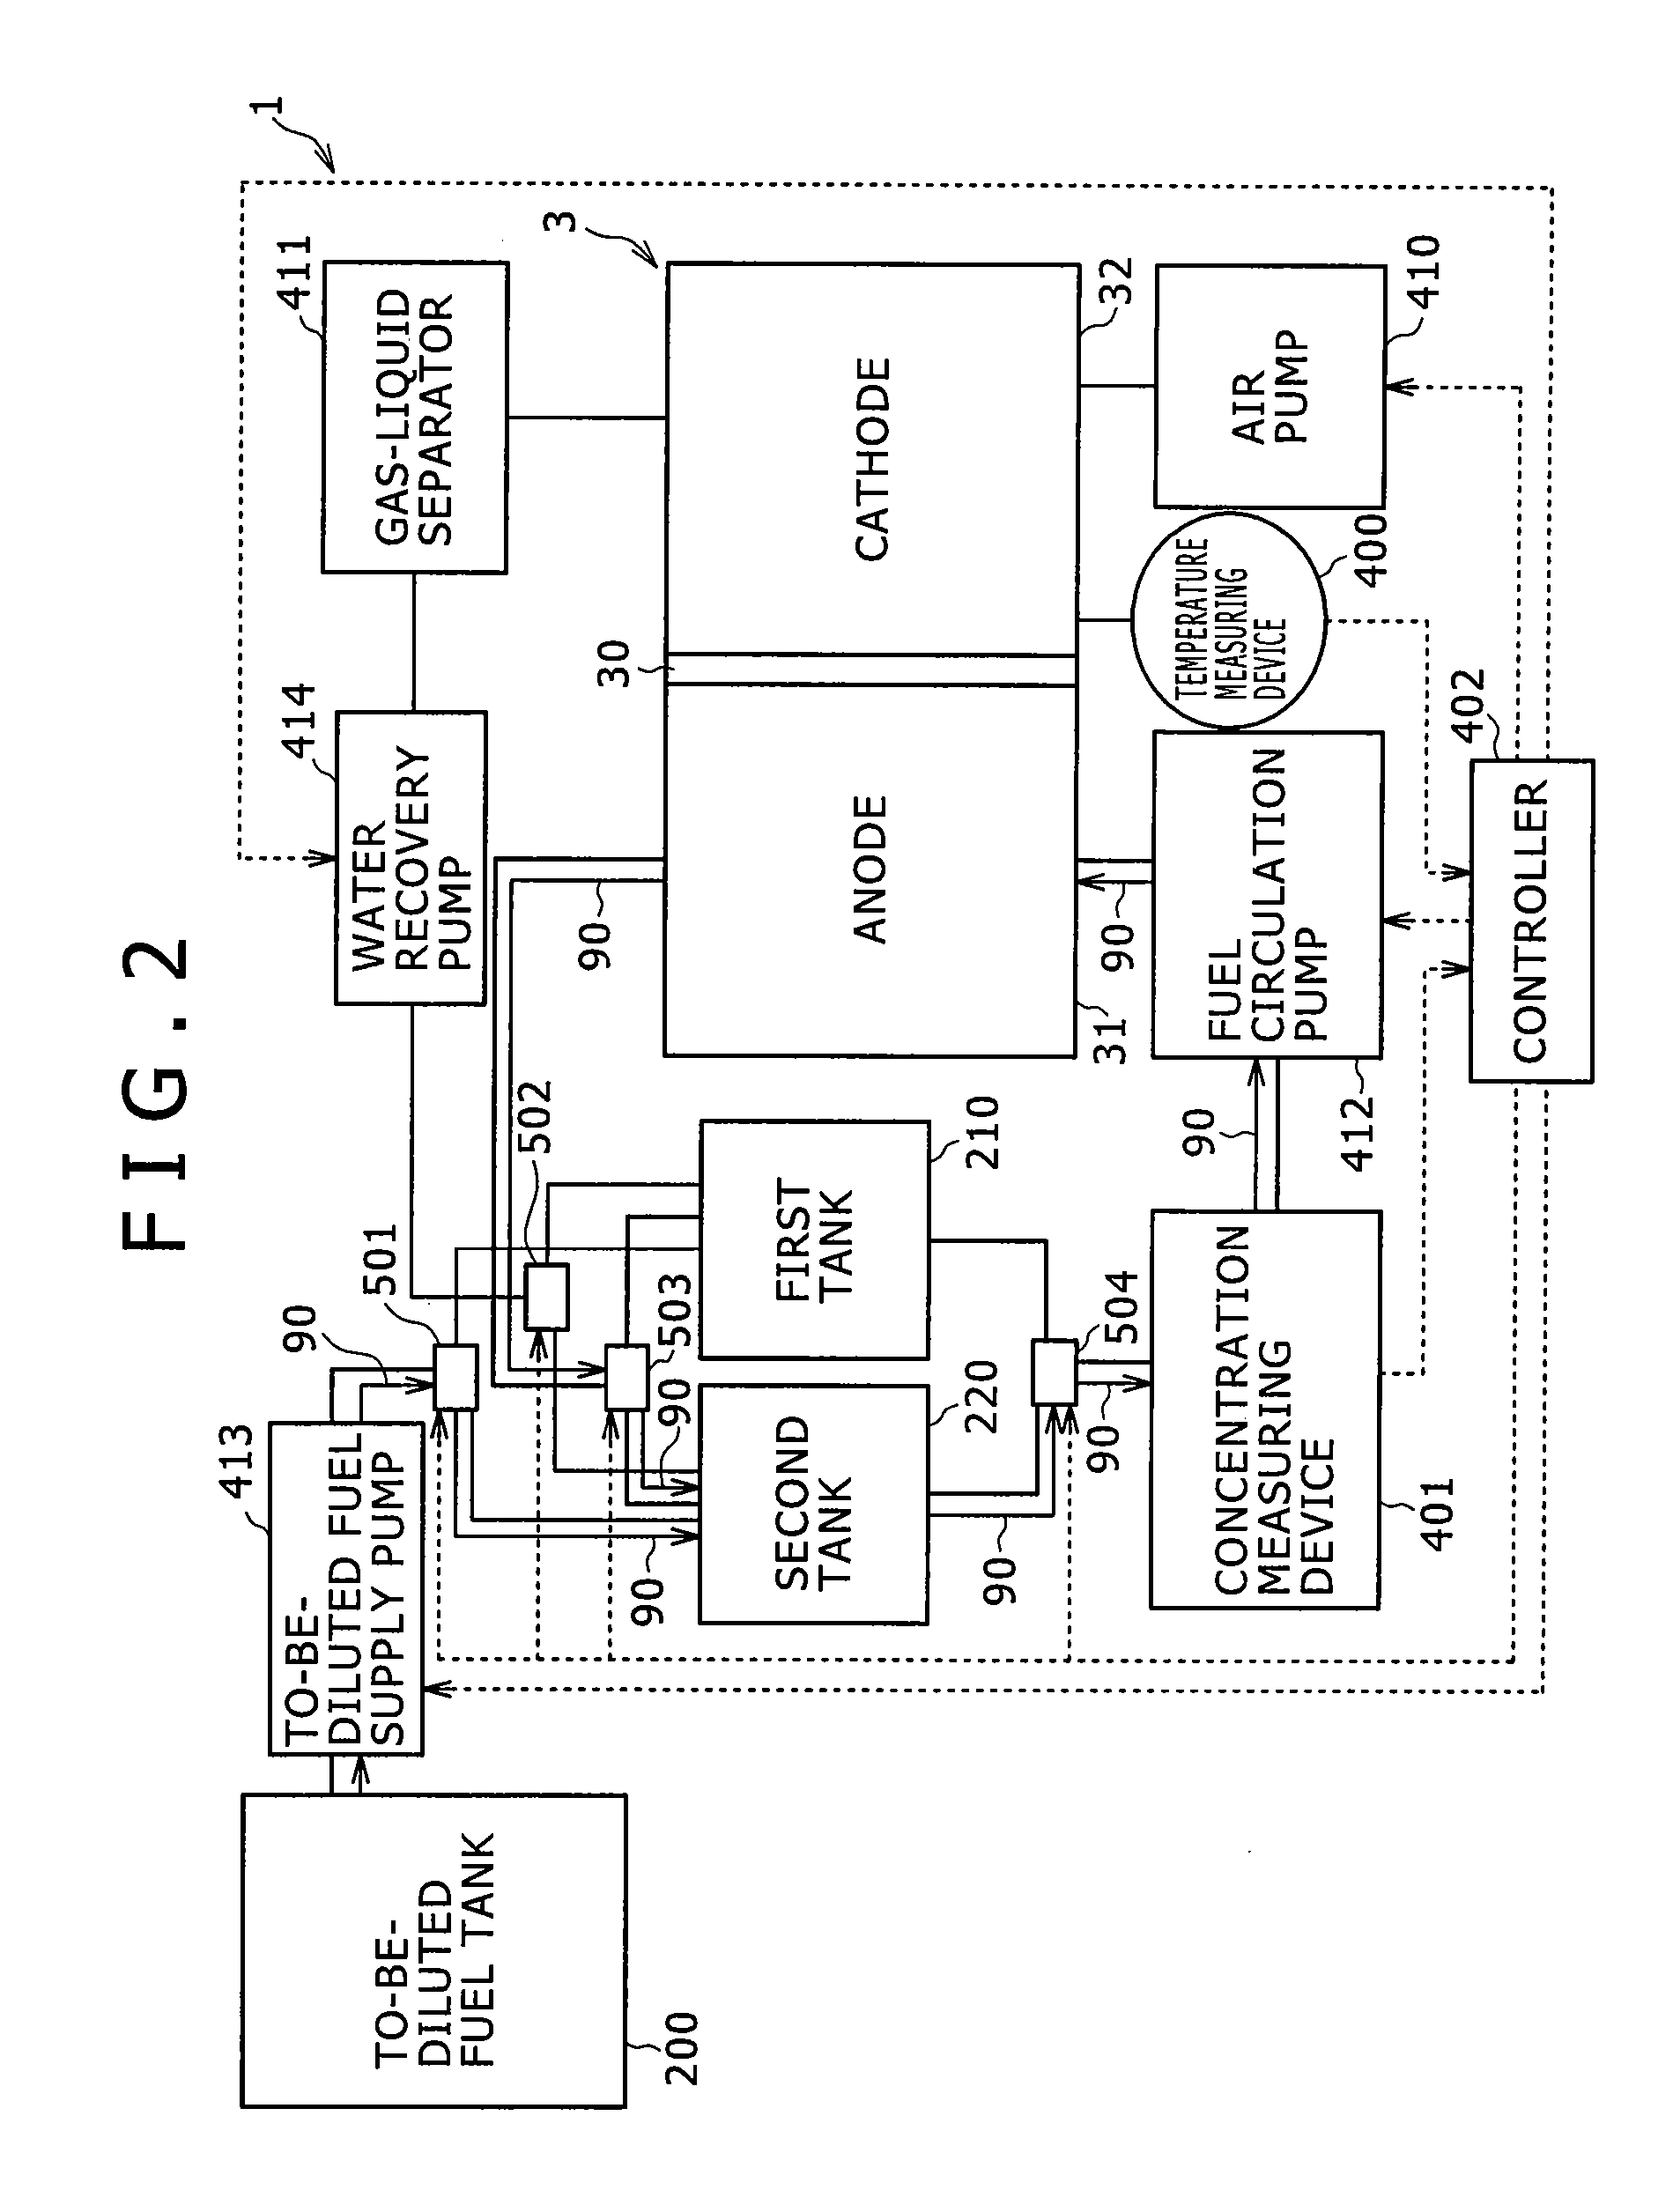 Fuel cell system and fuel cell starting method